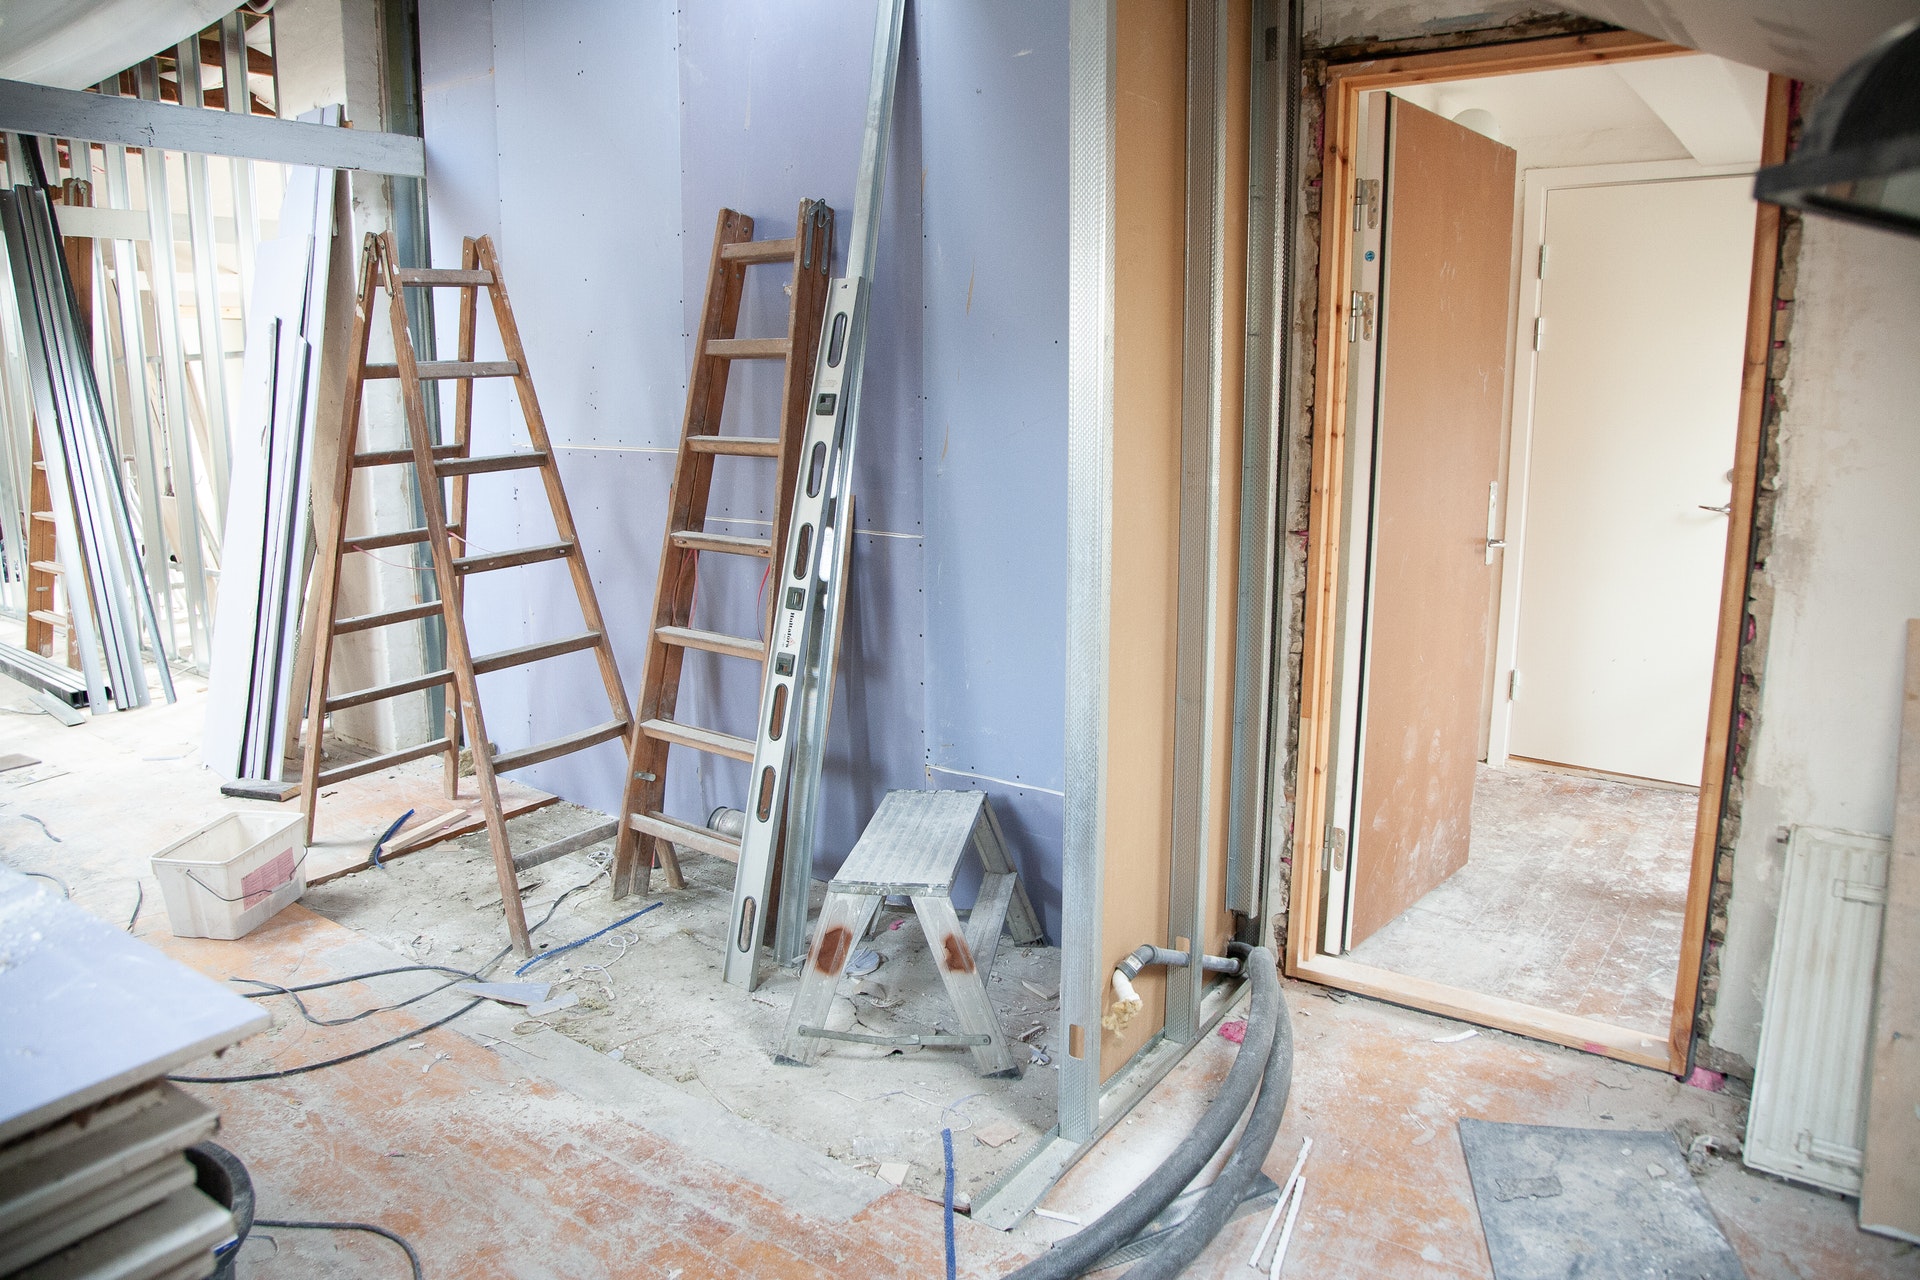 Starting a Home Renovating Business